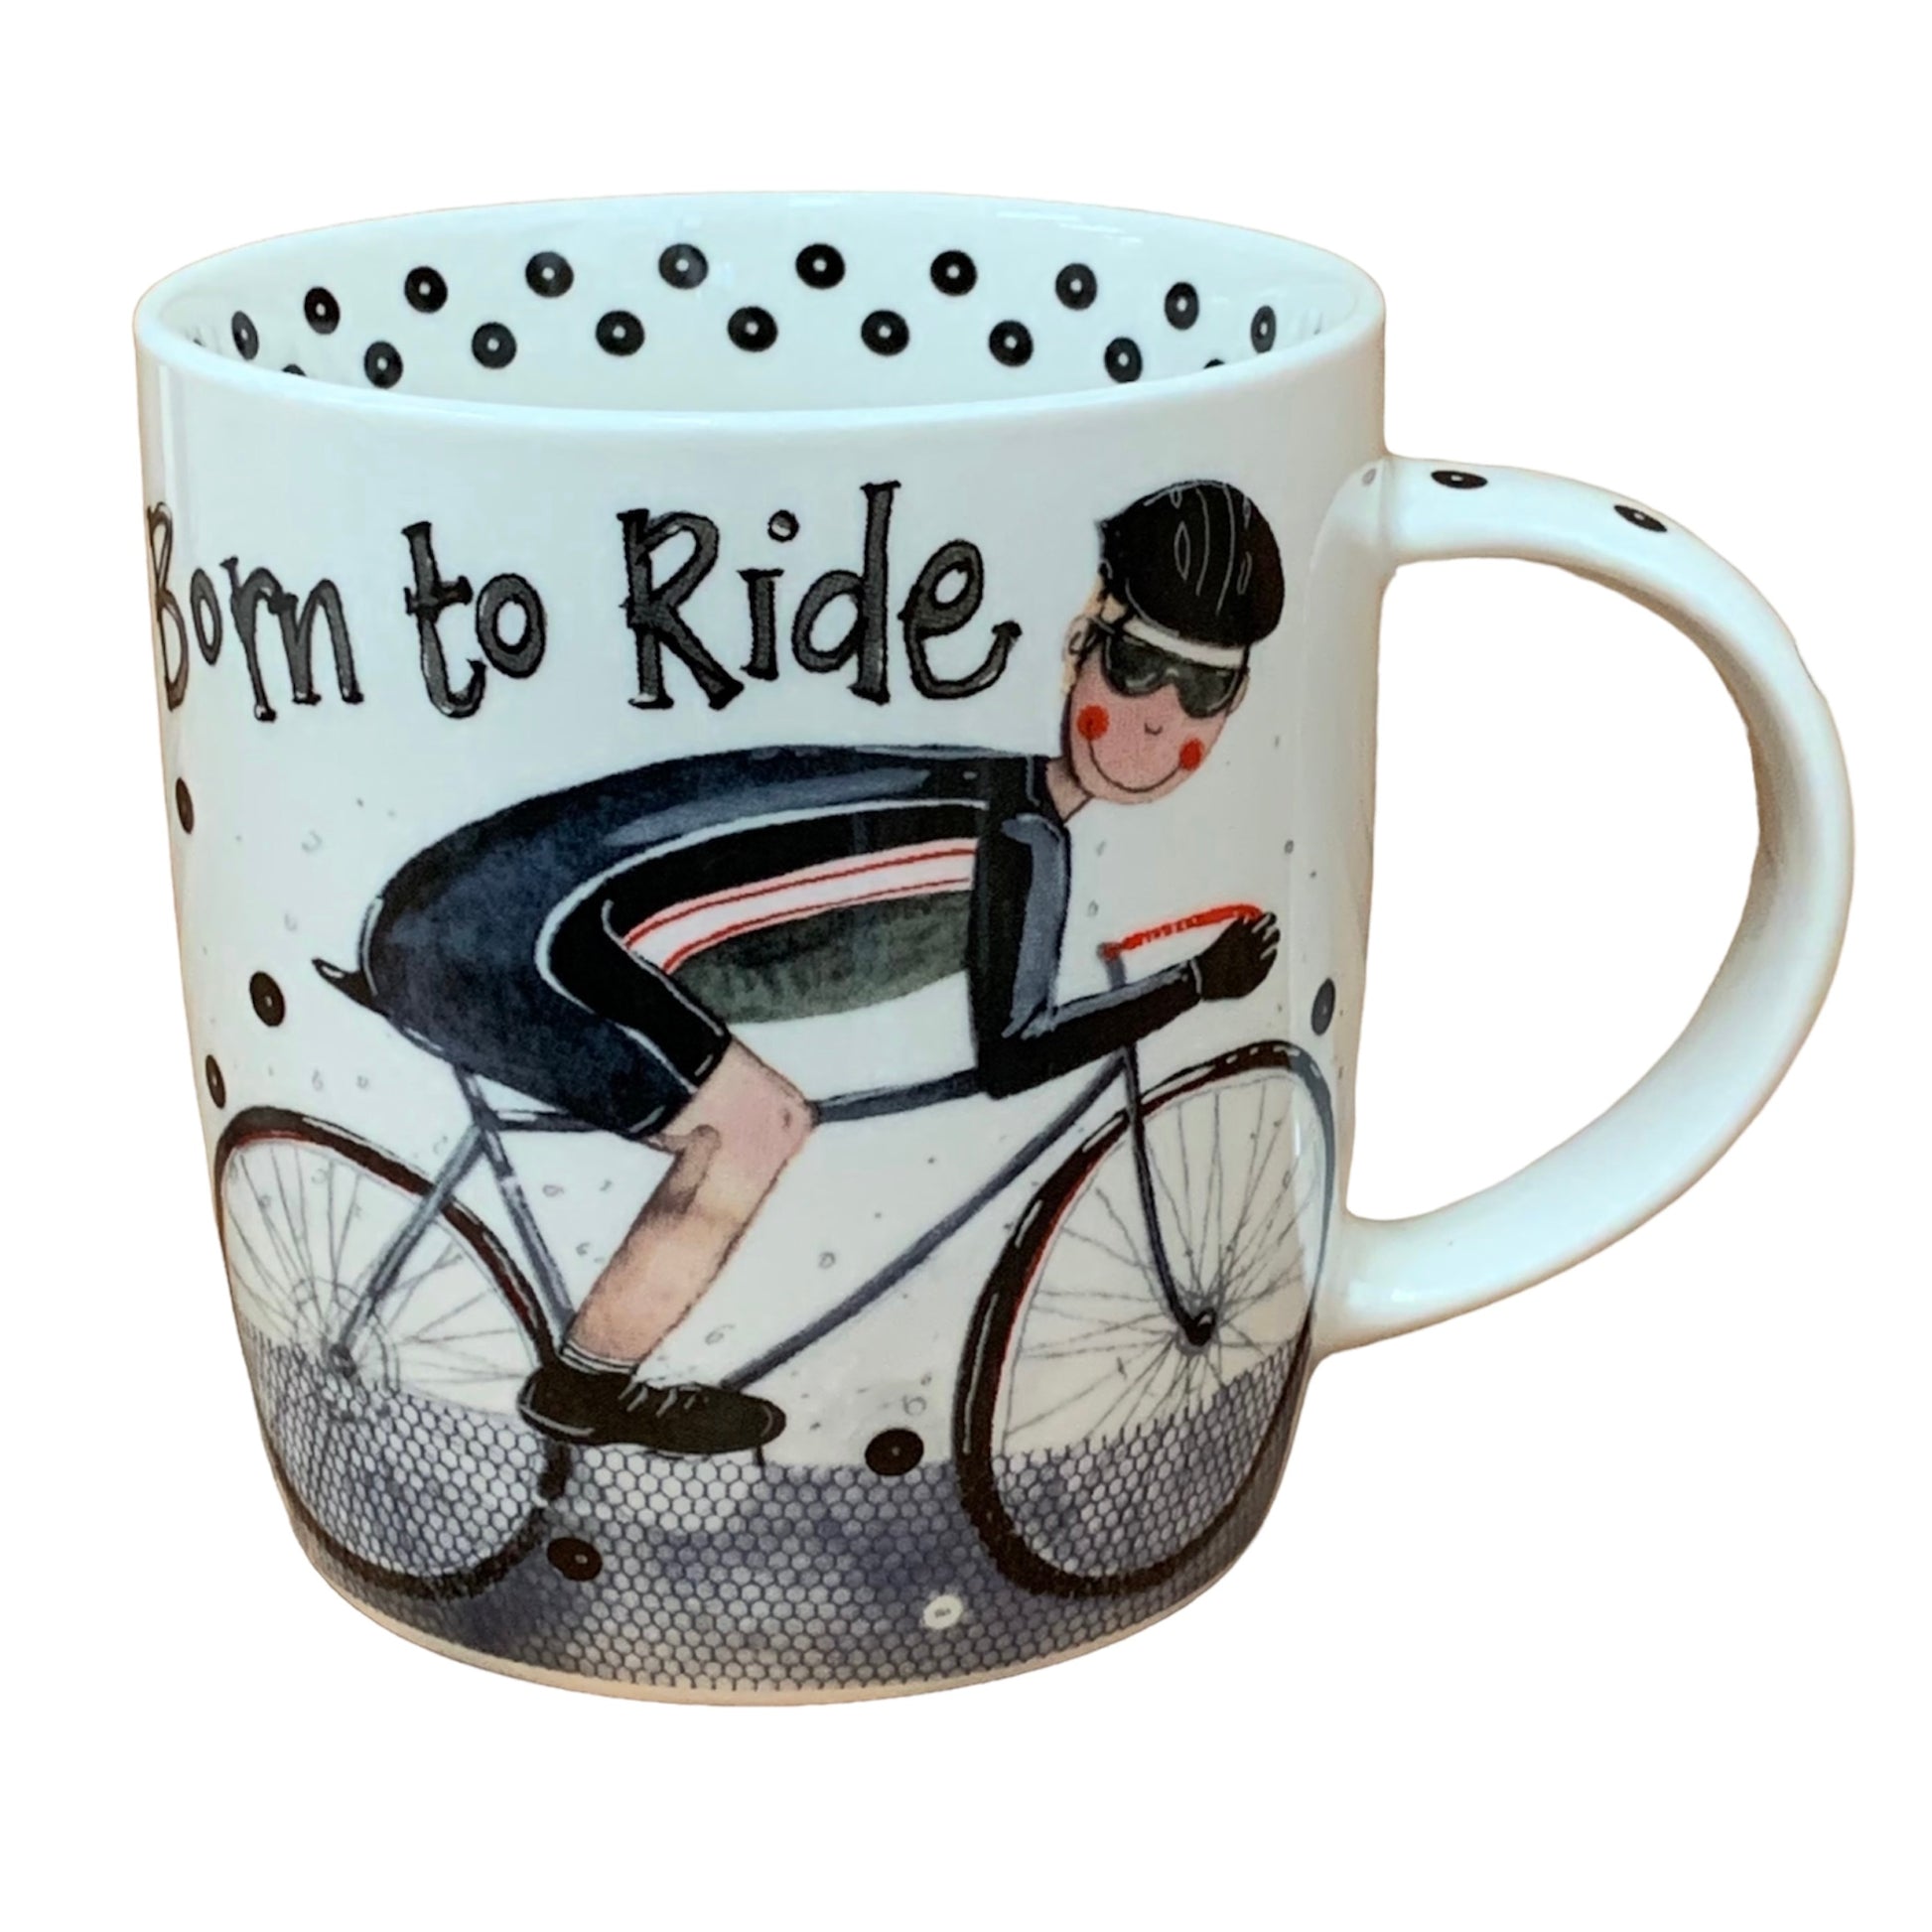 his Alex Clark mug is illustrated with a bike rider on a racer cycle bike and the words born to ride on the top of the mug.  This mug also features a black dot illustration around the inside rim & down the handle.  